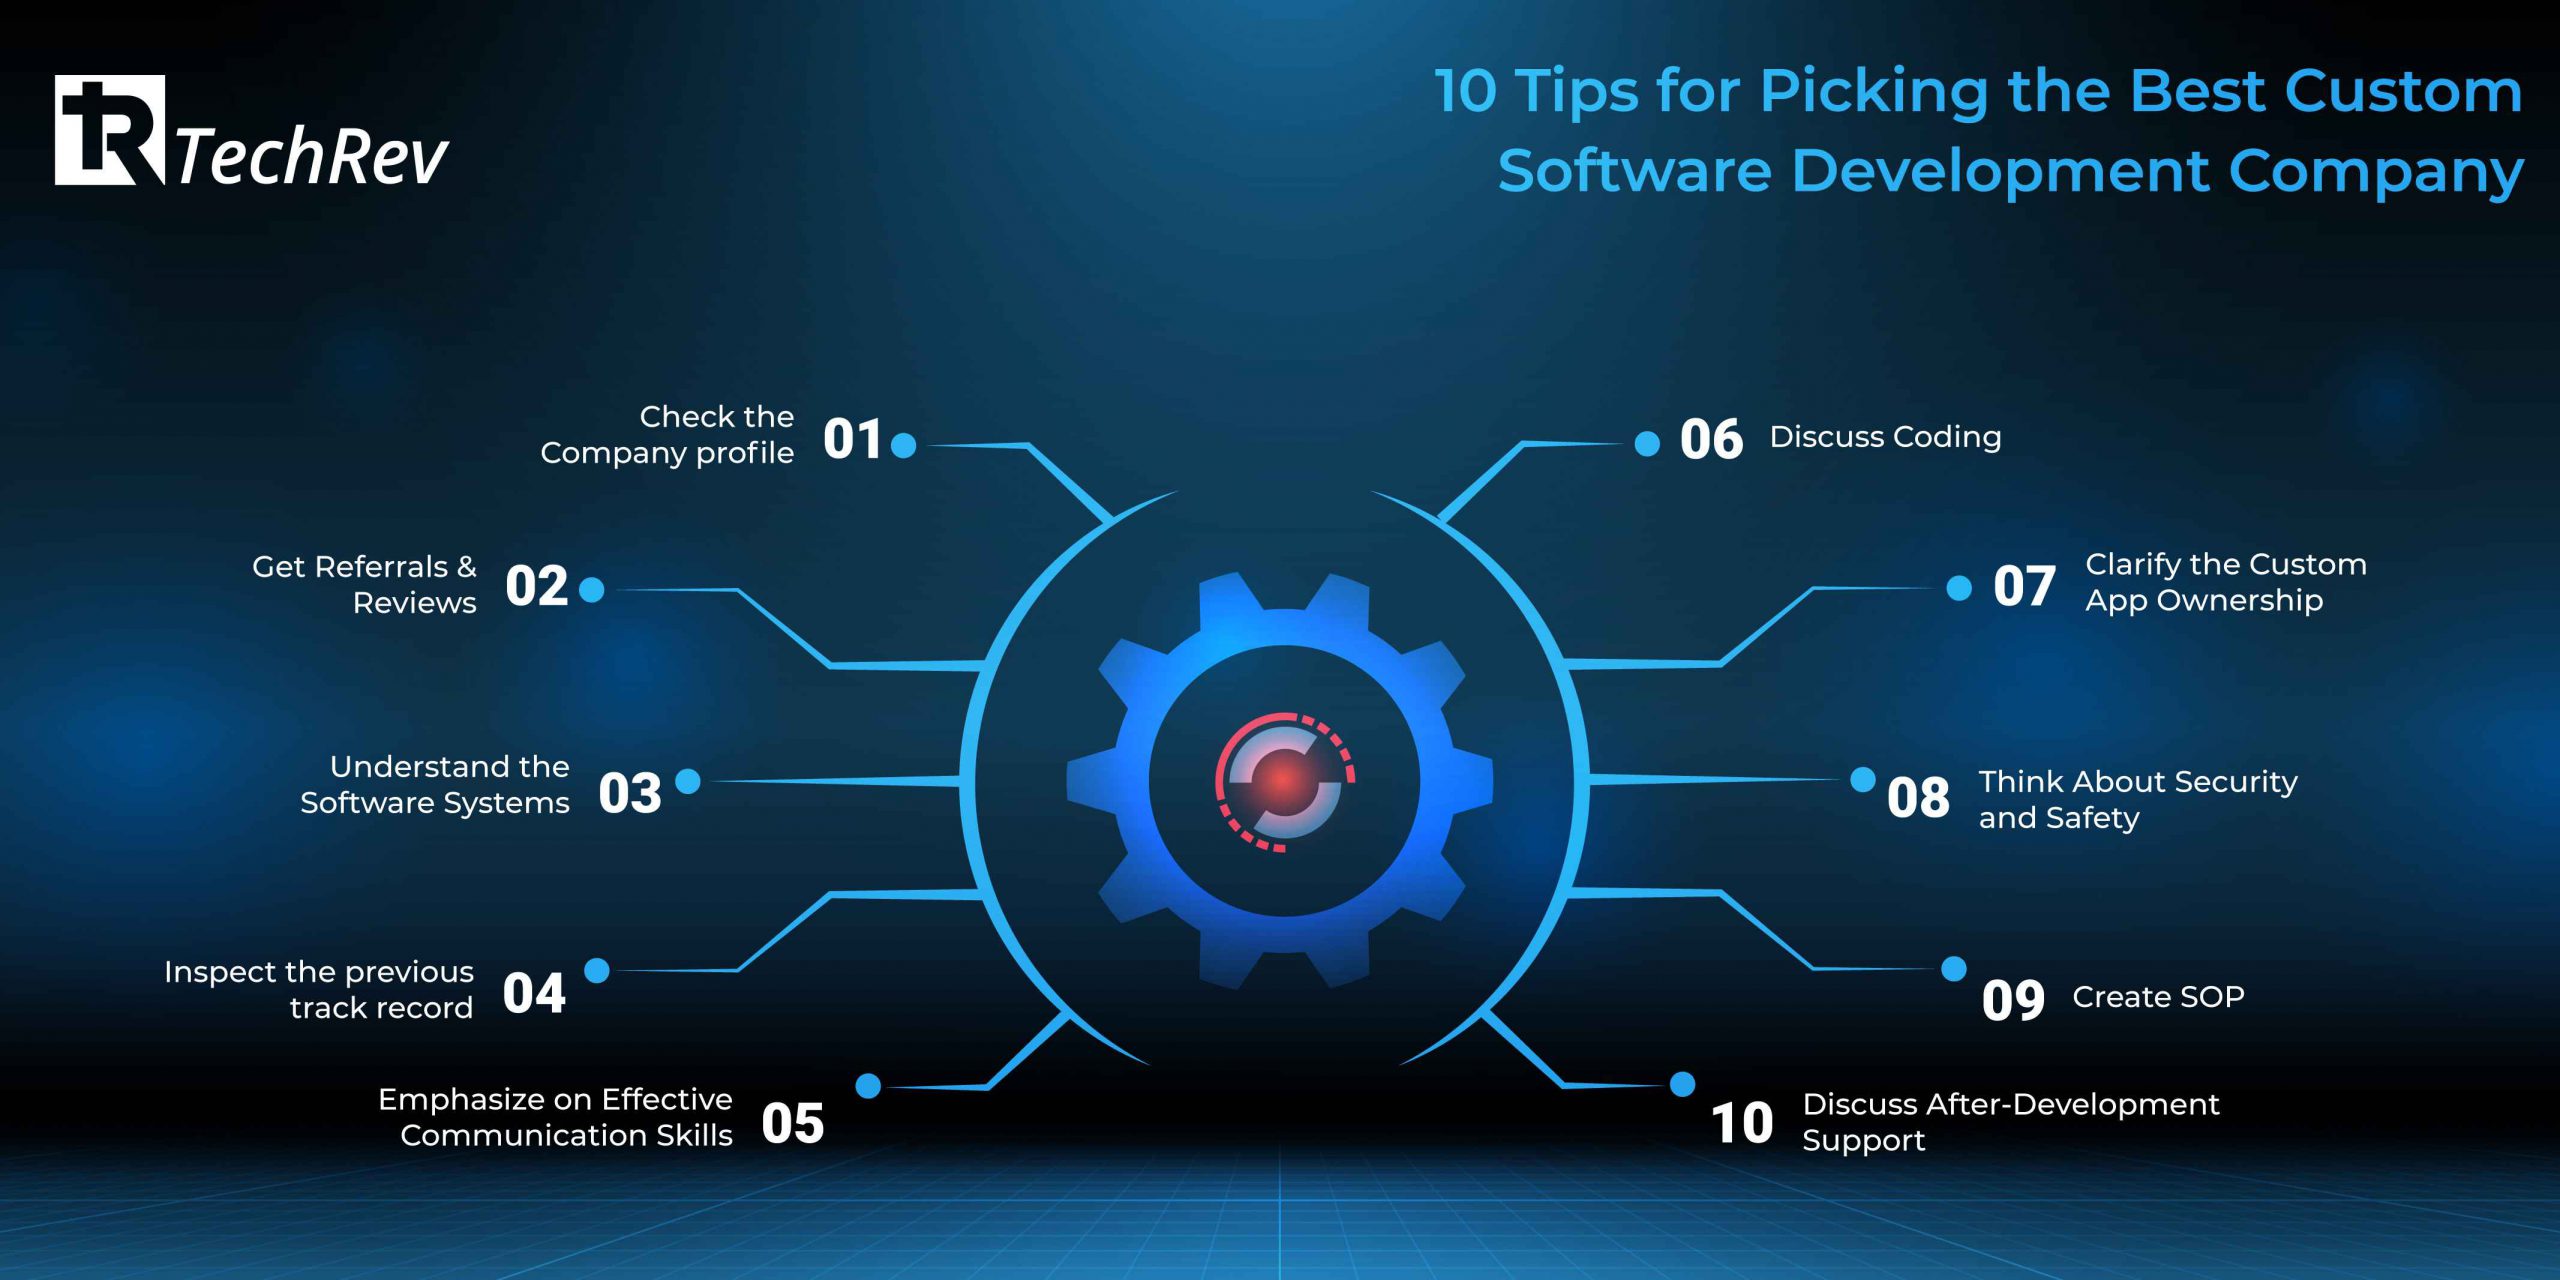 10 Tips for Picking the Best Custom Software Development Company